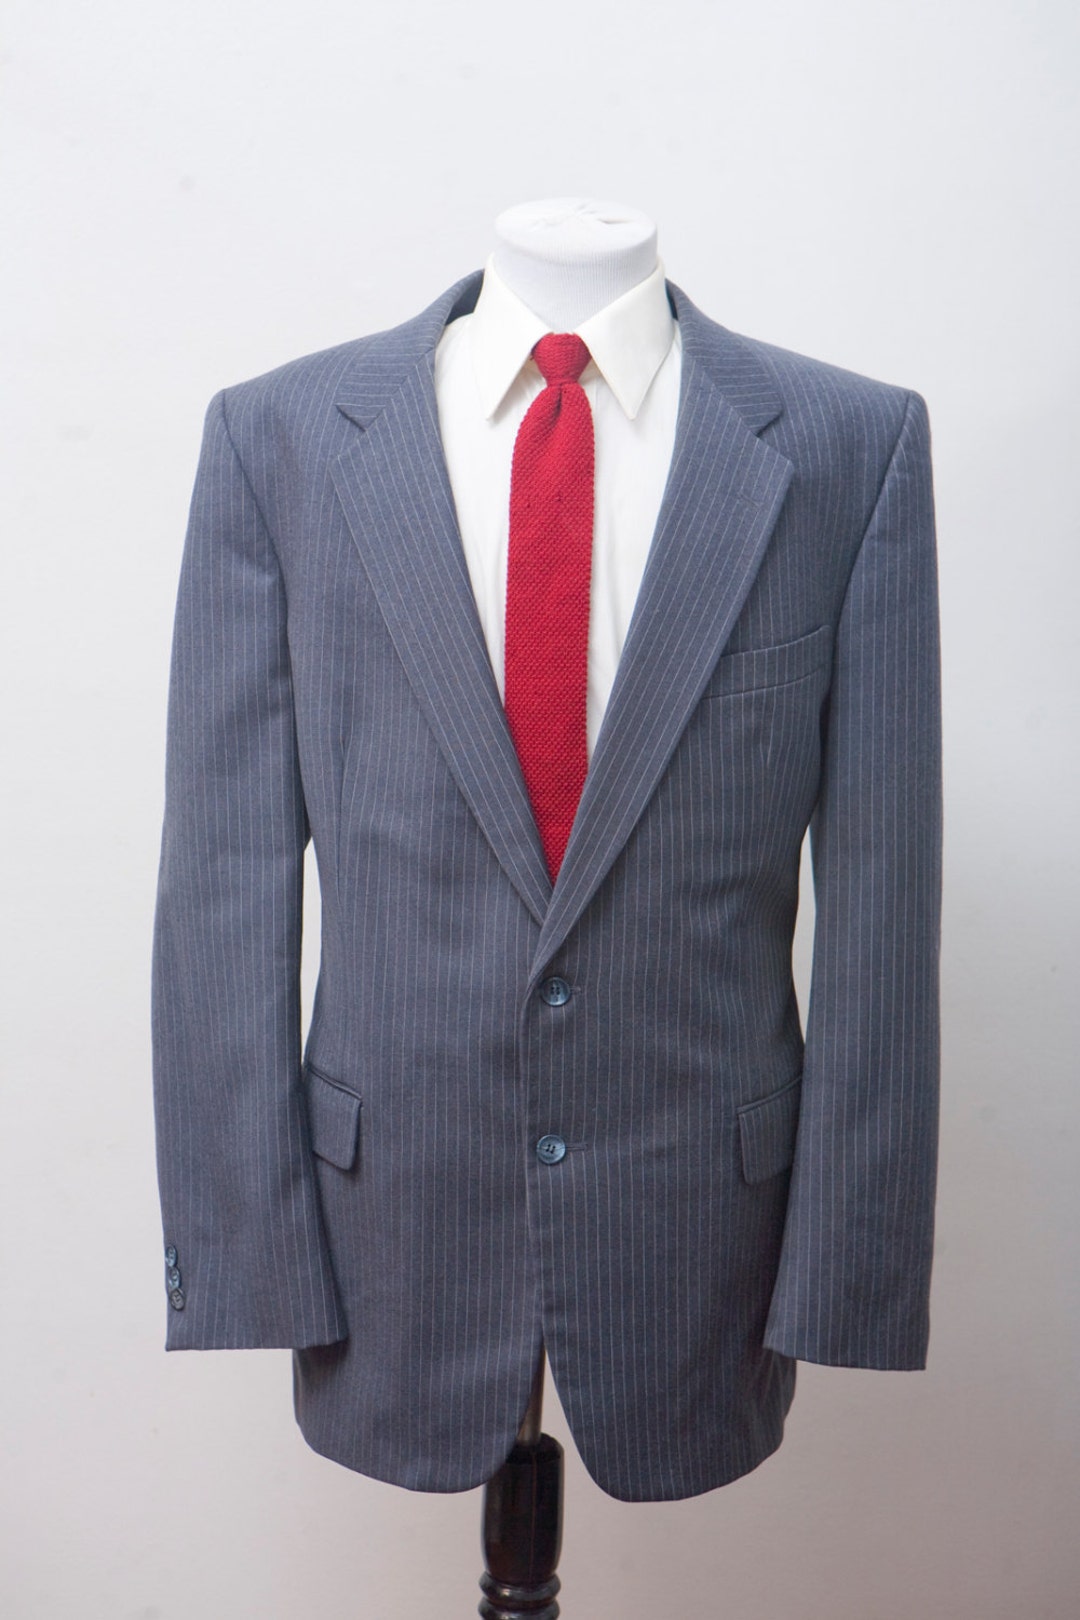 Men's Wool Suit / Vintage Jacket and Trousers / Size 46/large / Fellini ...